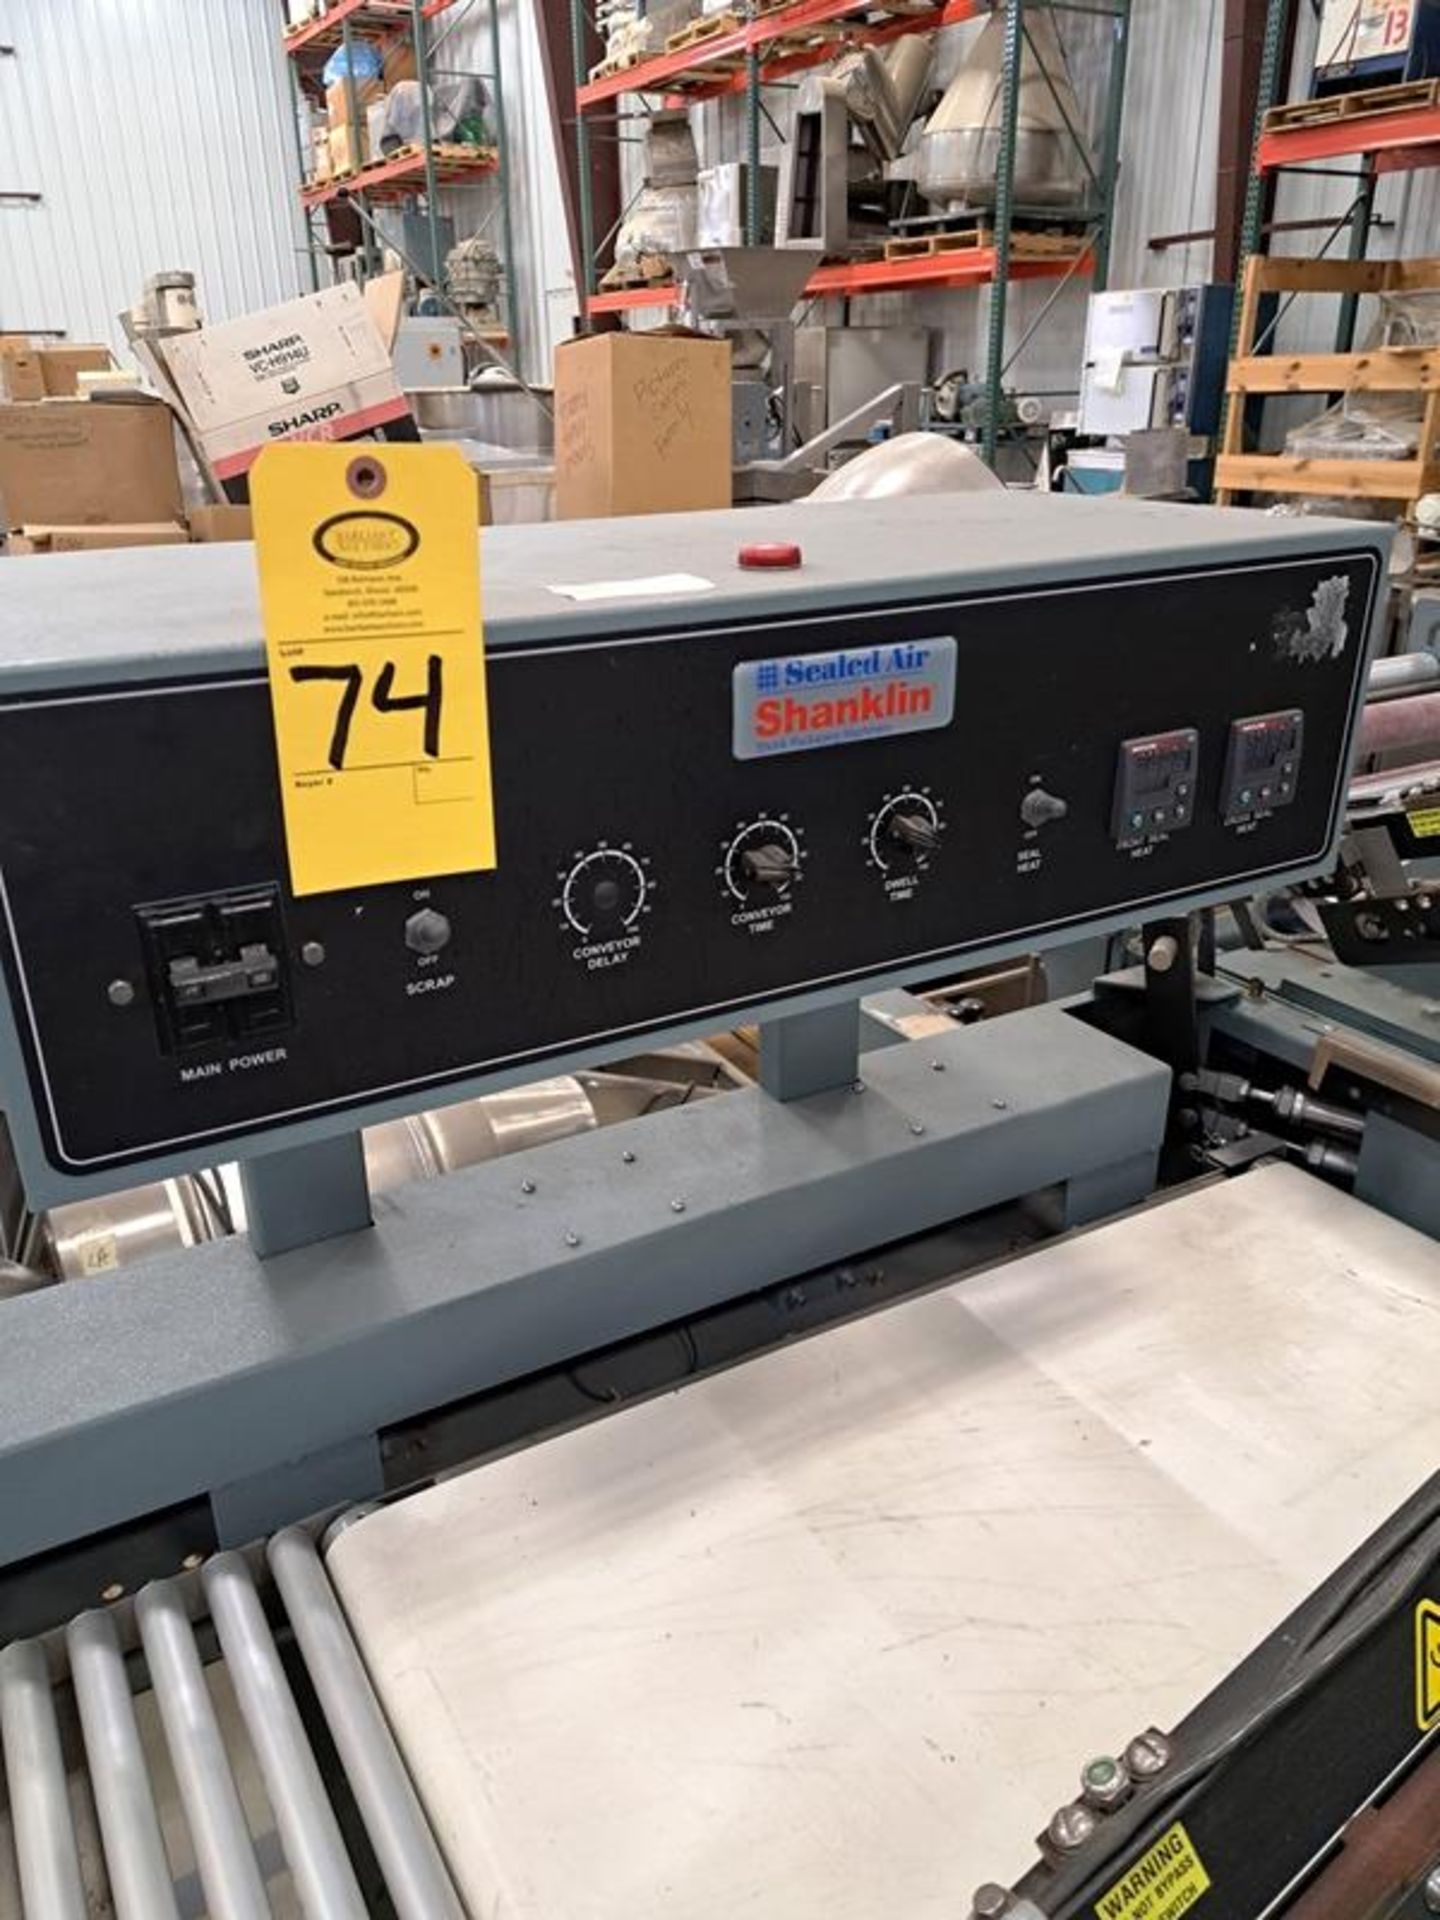 Shanklin Mdl. S24B Automatic "L" Bar Sealer, Ser. #S10022-01, 208 volts, 1 phase, manual controls, - Image 2 of 5